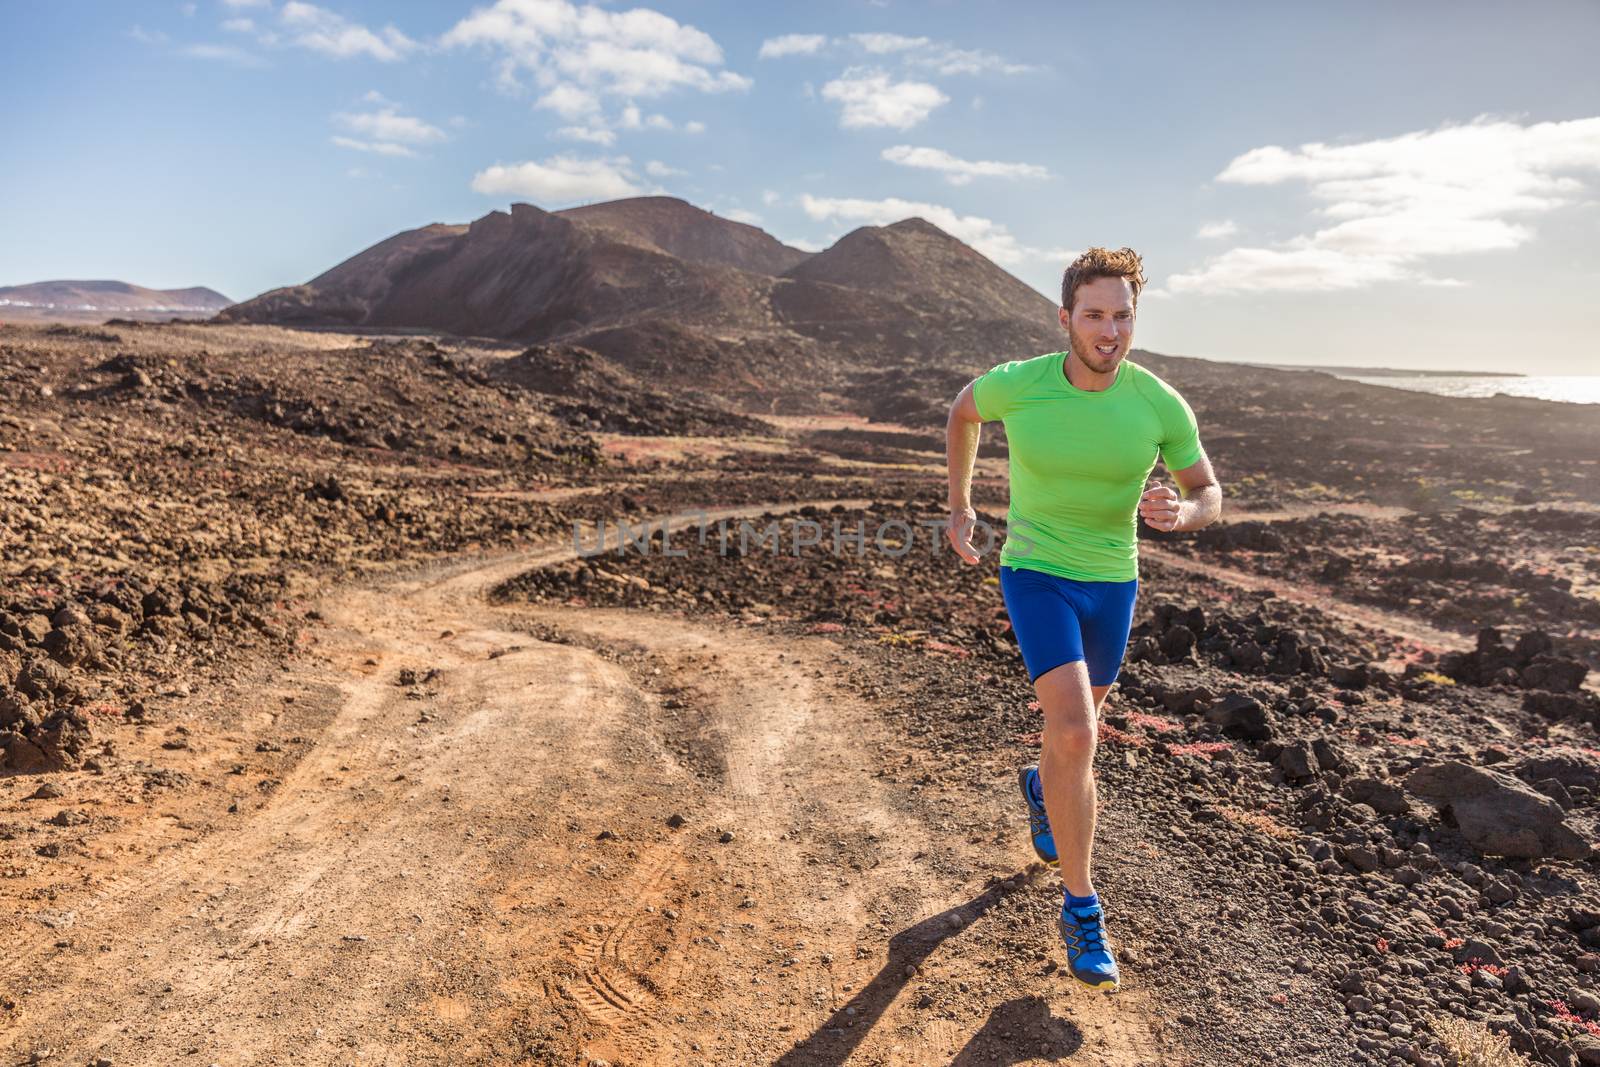 Trail runner male athlete running in nature rocky volcanic mountain background. Active fit sports man in compression sportswear sprinting on rocks path working out cardio training body.